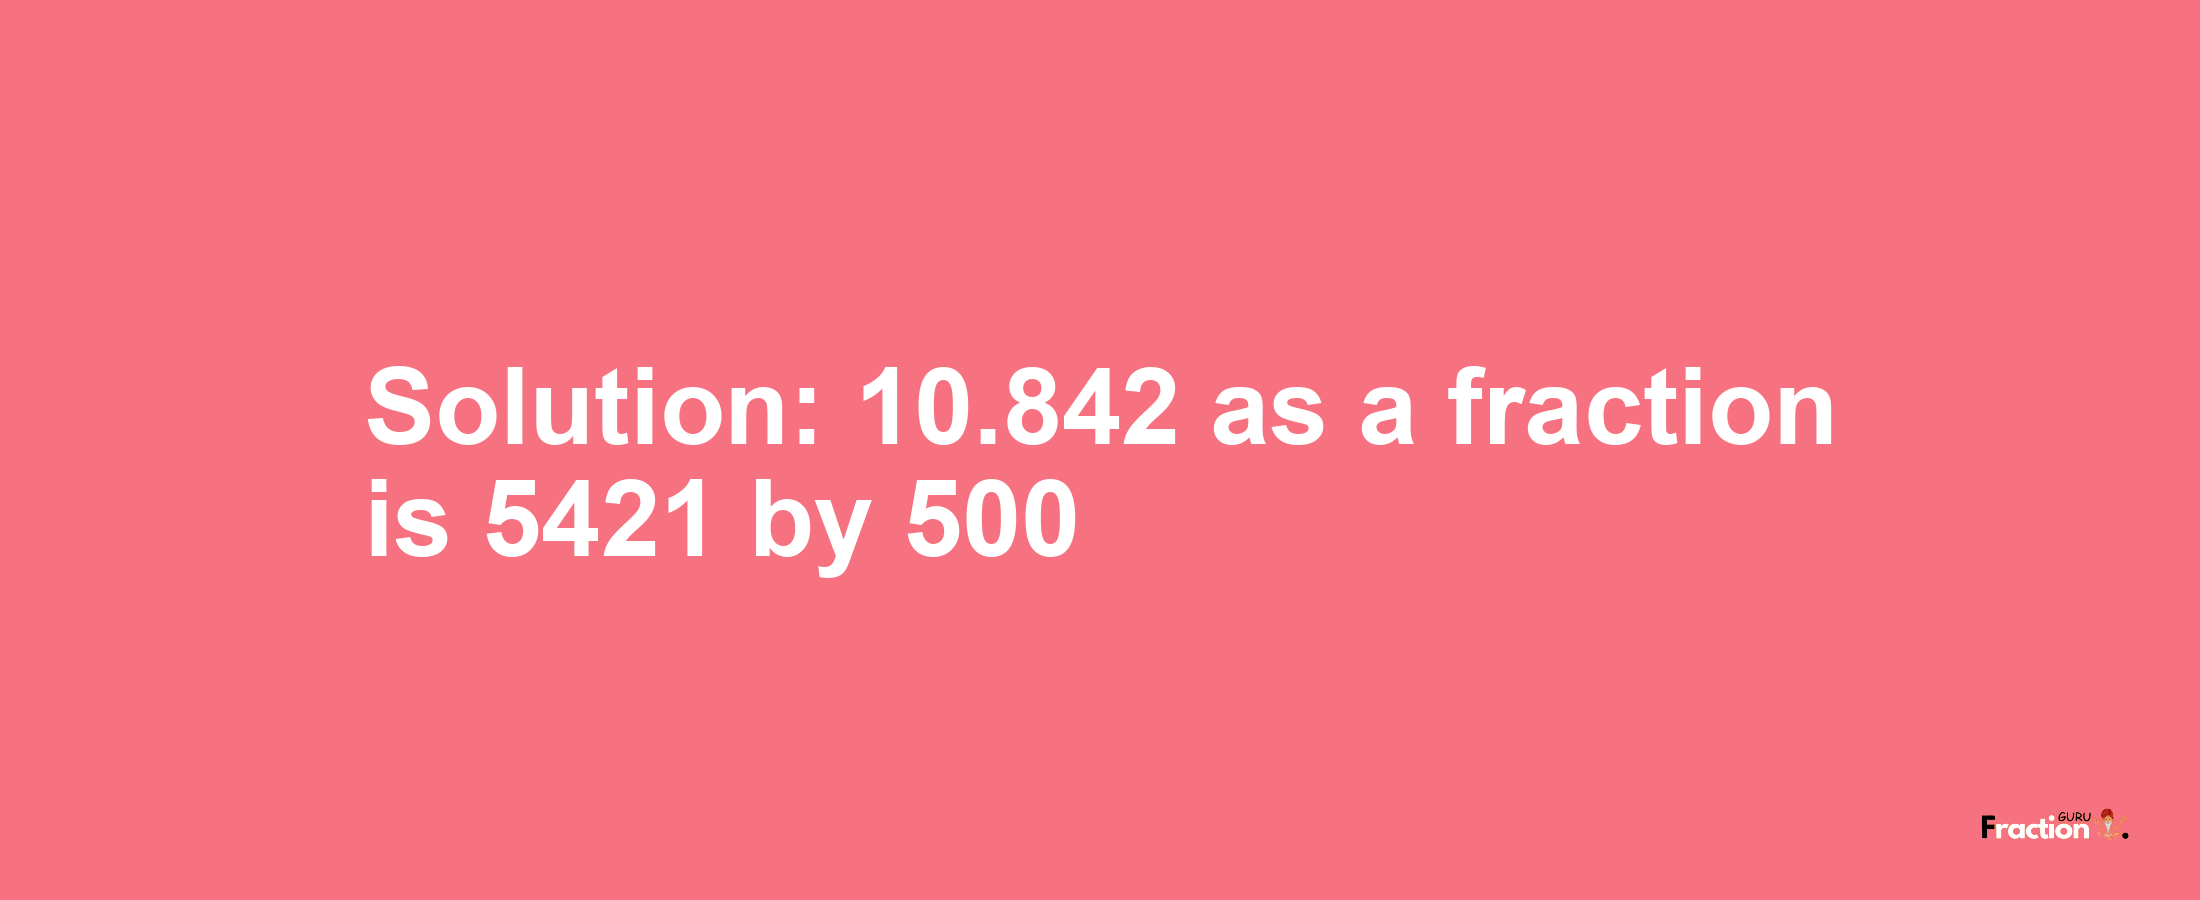 Solution:10.842 as a fraction is 5421/500